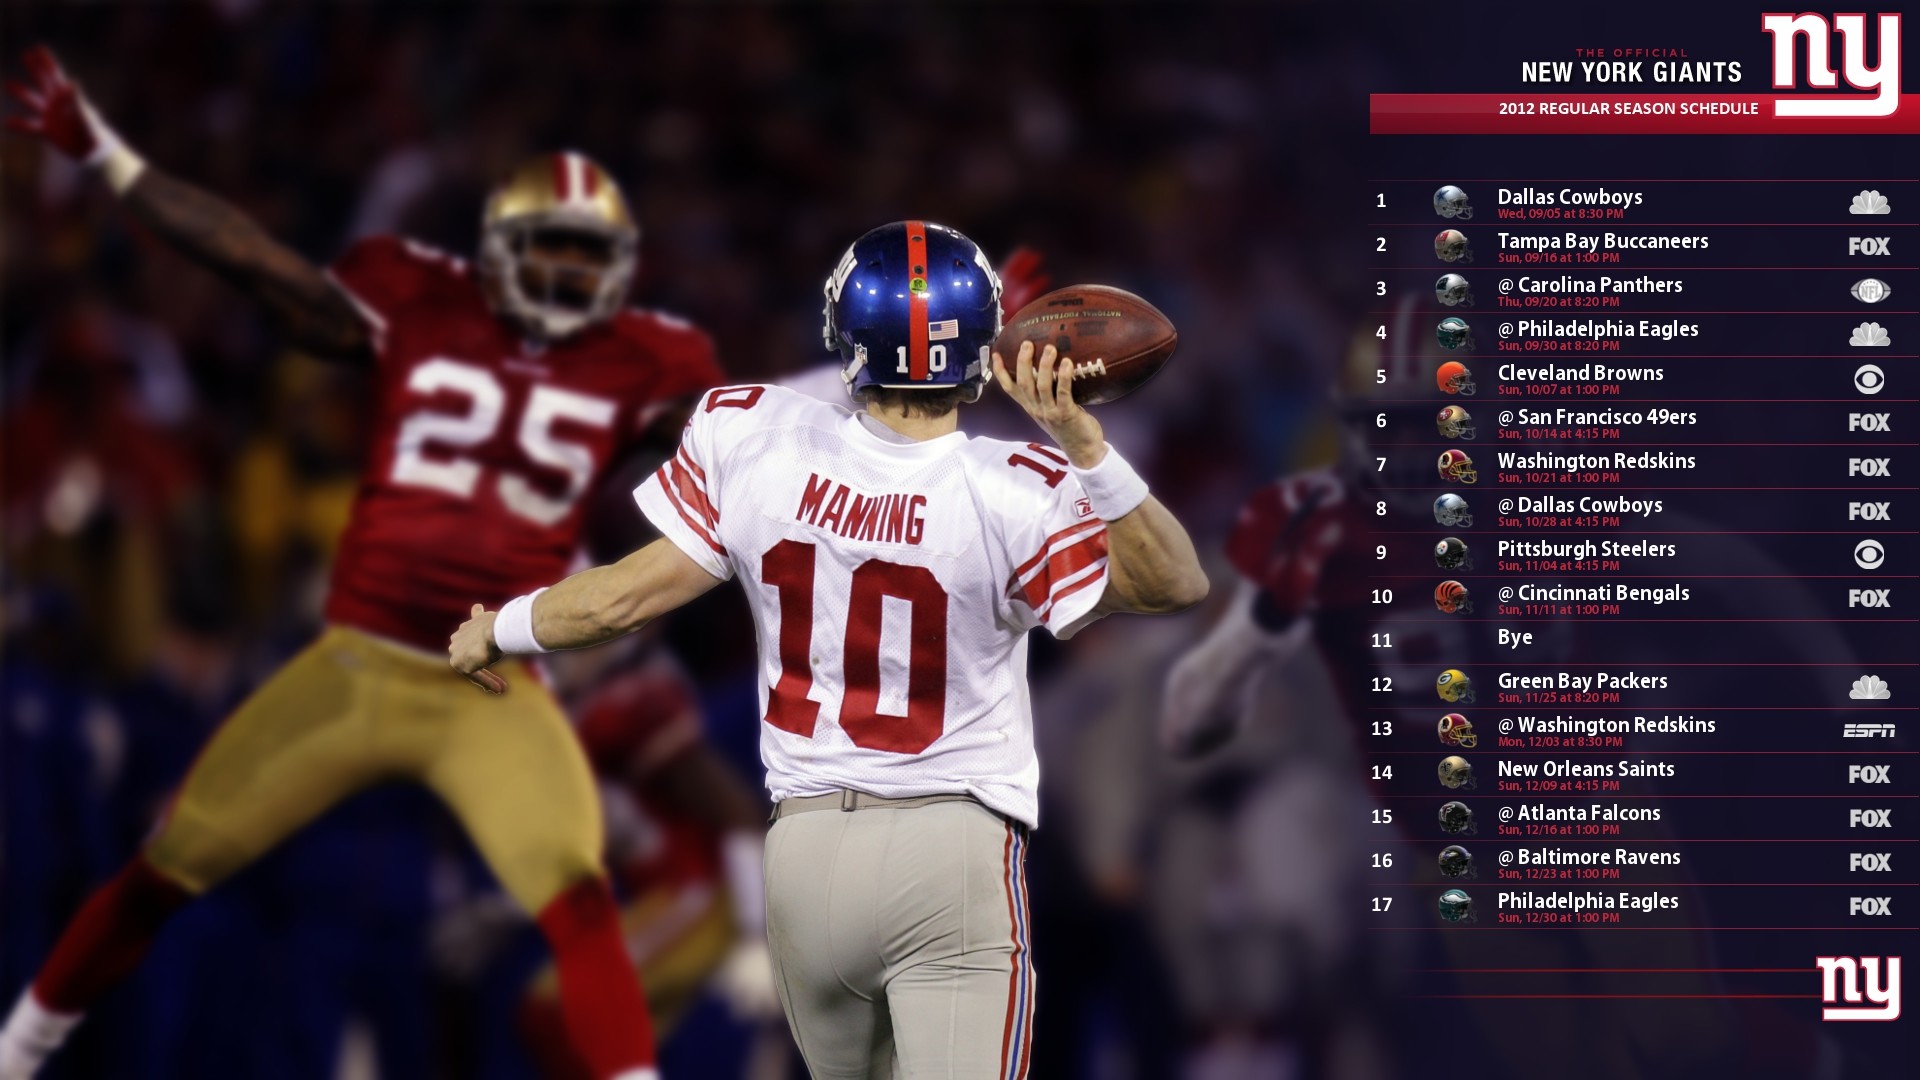 Games Wallpapers For Mobile - Logos And Uniforms Of The New York Giants - HD Wallpaper 